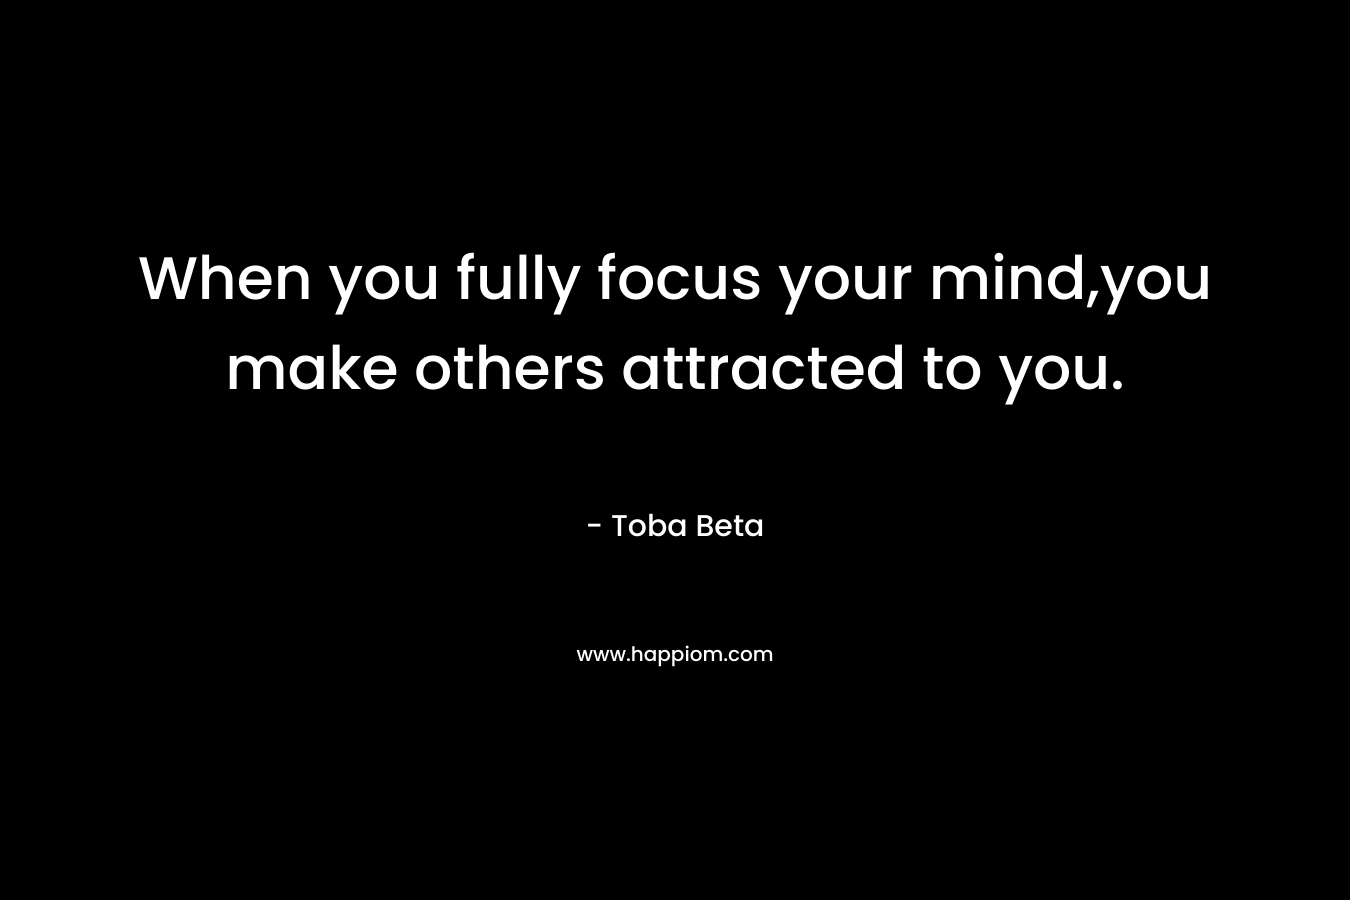 When you fully focus your mind,you make others attracted to you. – Toba Beta